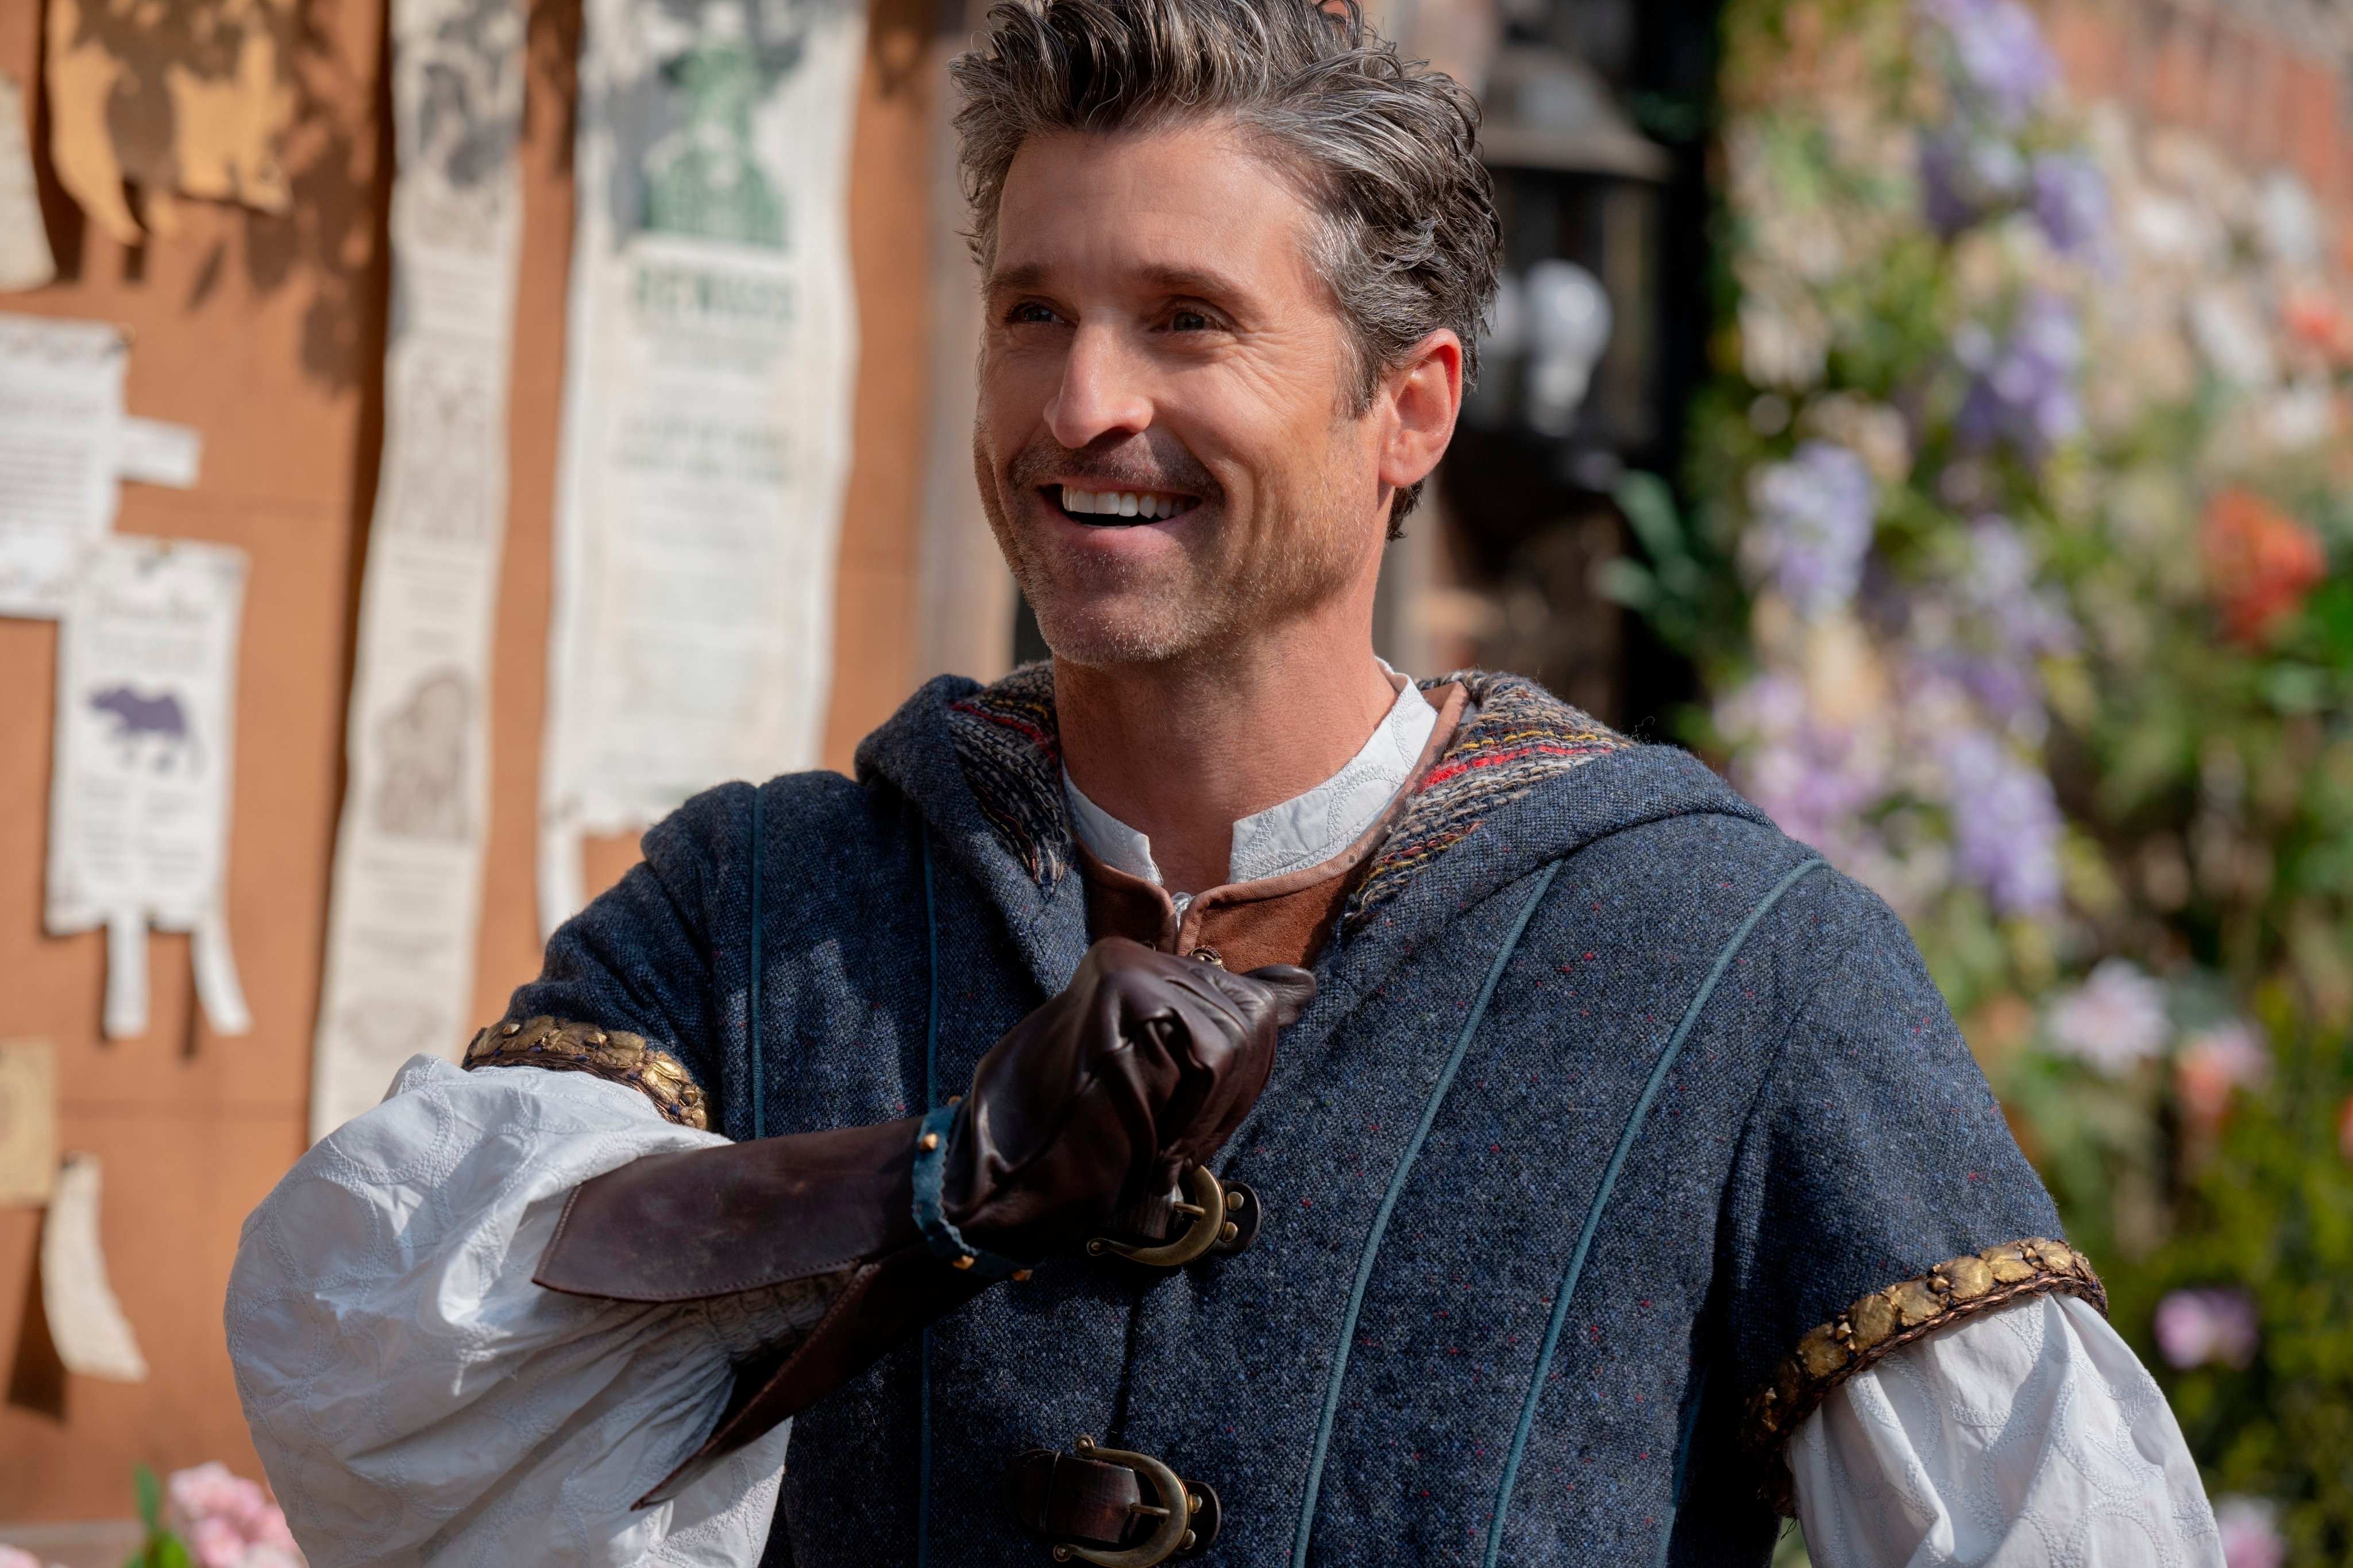 Patrick Dempsey talks about  Disenchanted, how he relished the more swashbuckling role (above), and the heroic singing and dancing. Photo: Disney+ via AP